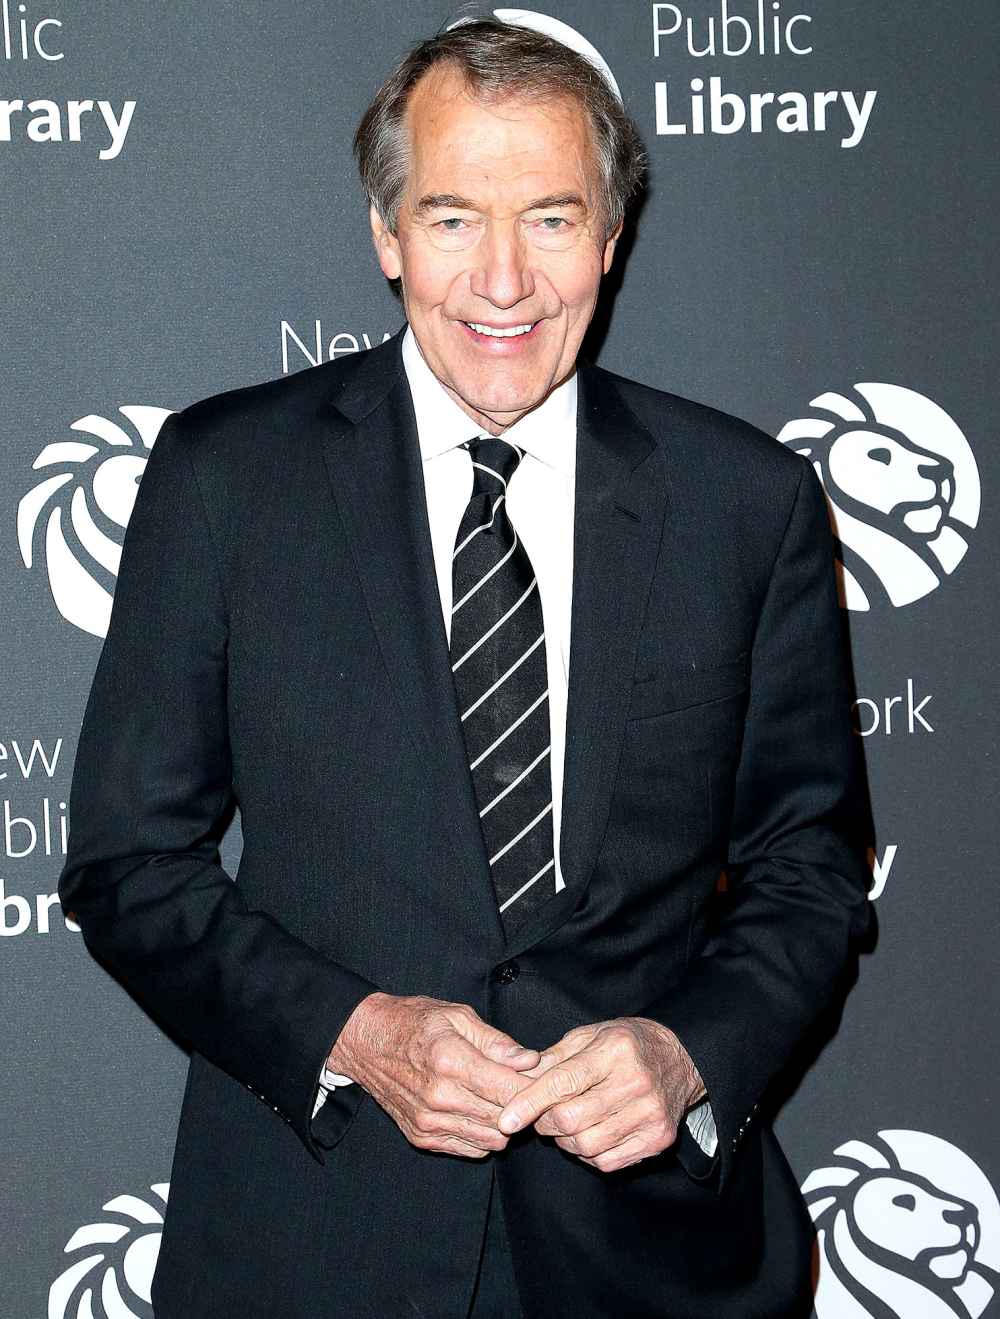 Charlie Rose attends 2016 Library Lions Gala at New York Public Library - Stephen A Schwartzman Building on November 7, 2016 in New York City.